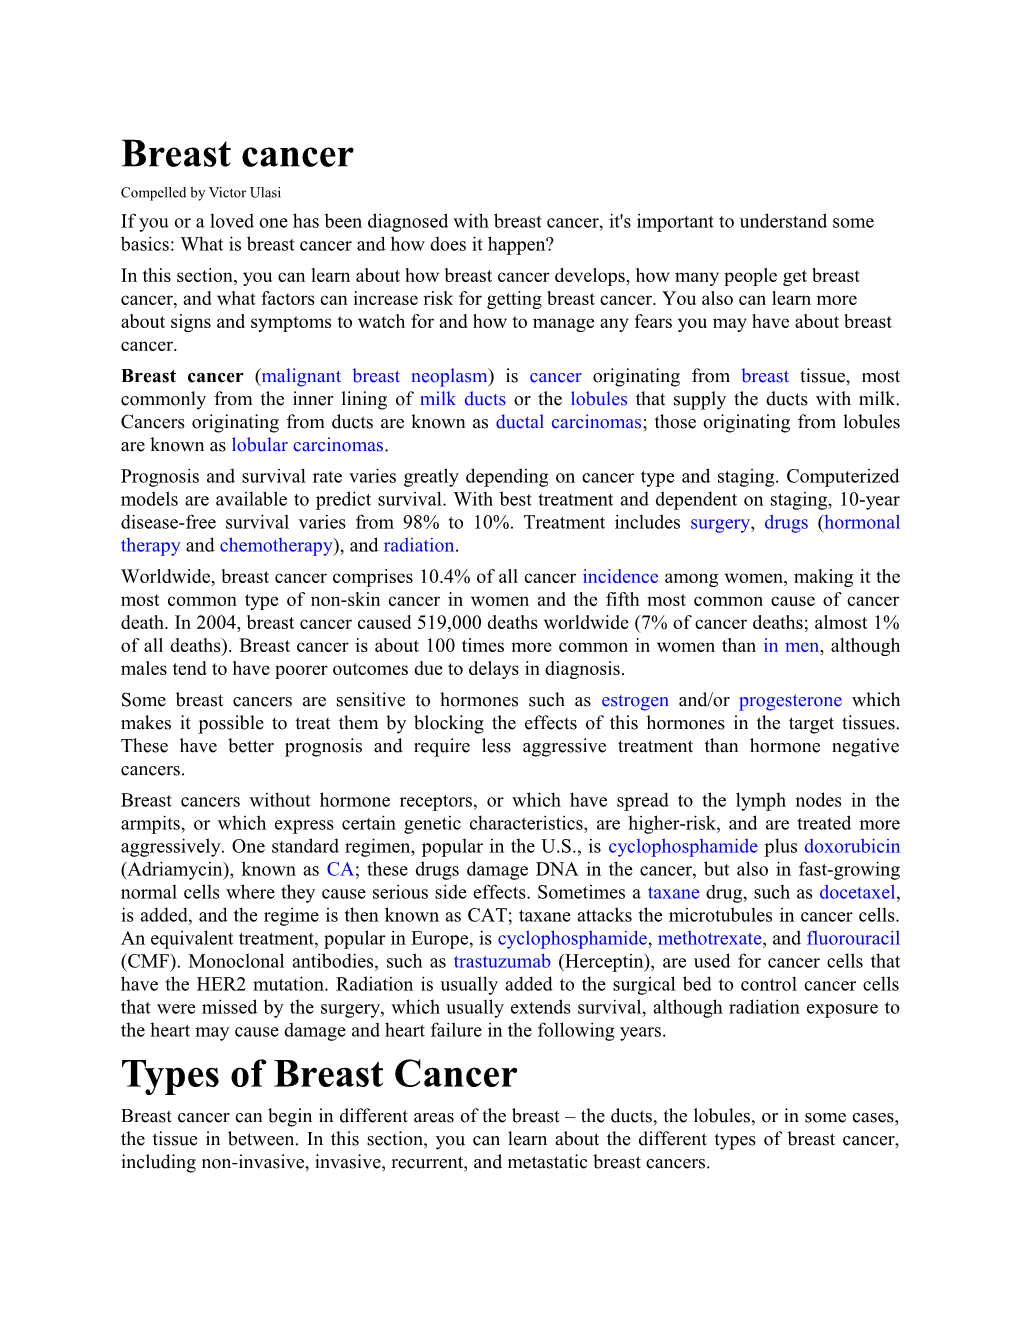 Breast Cancer s1